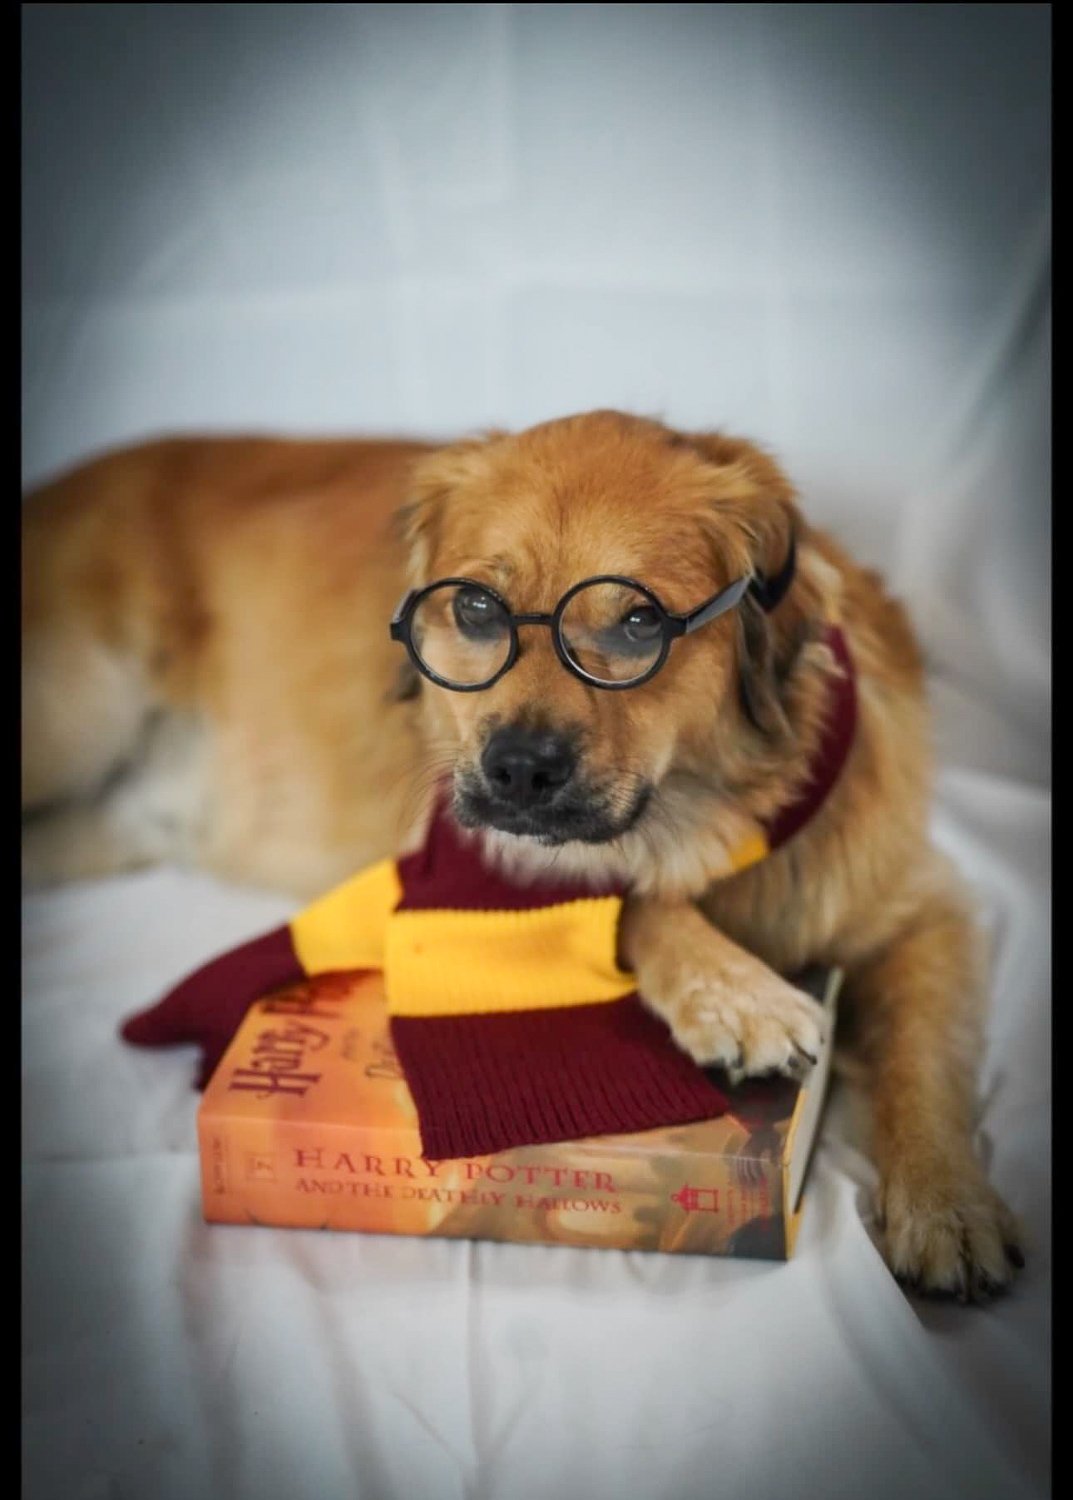 A reddish brown dog lying down wearing Harry Potter glasses and scarf with a paw on a Harry Potter book